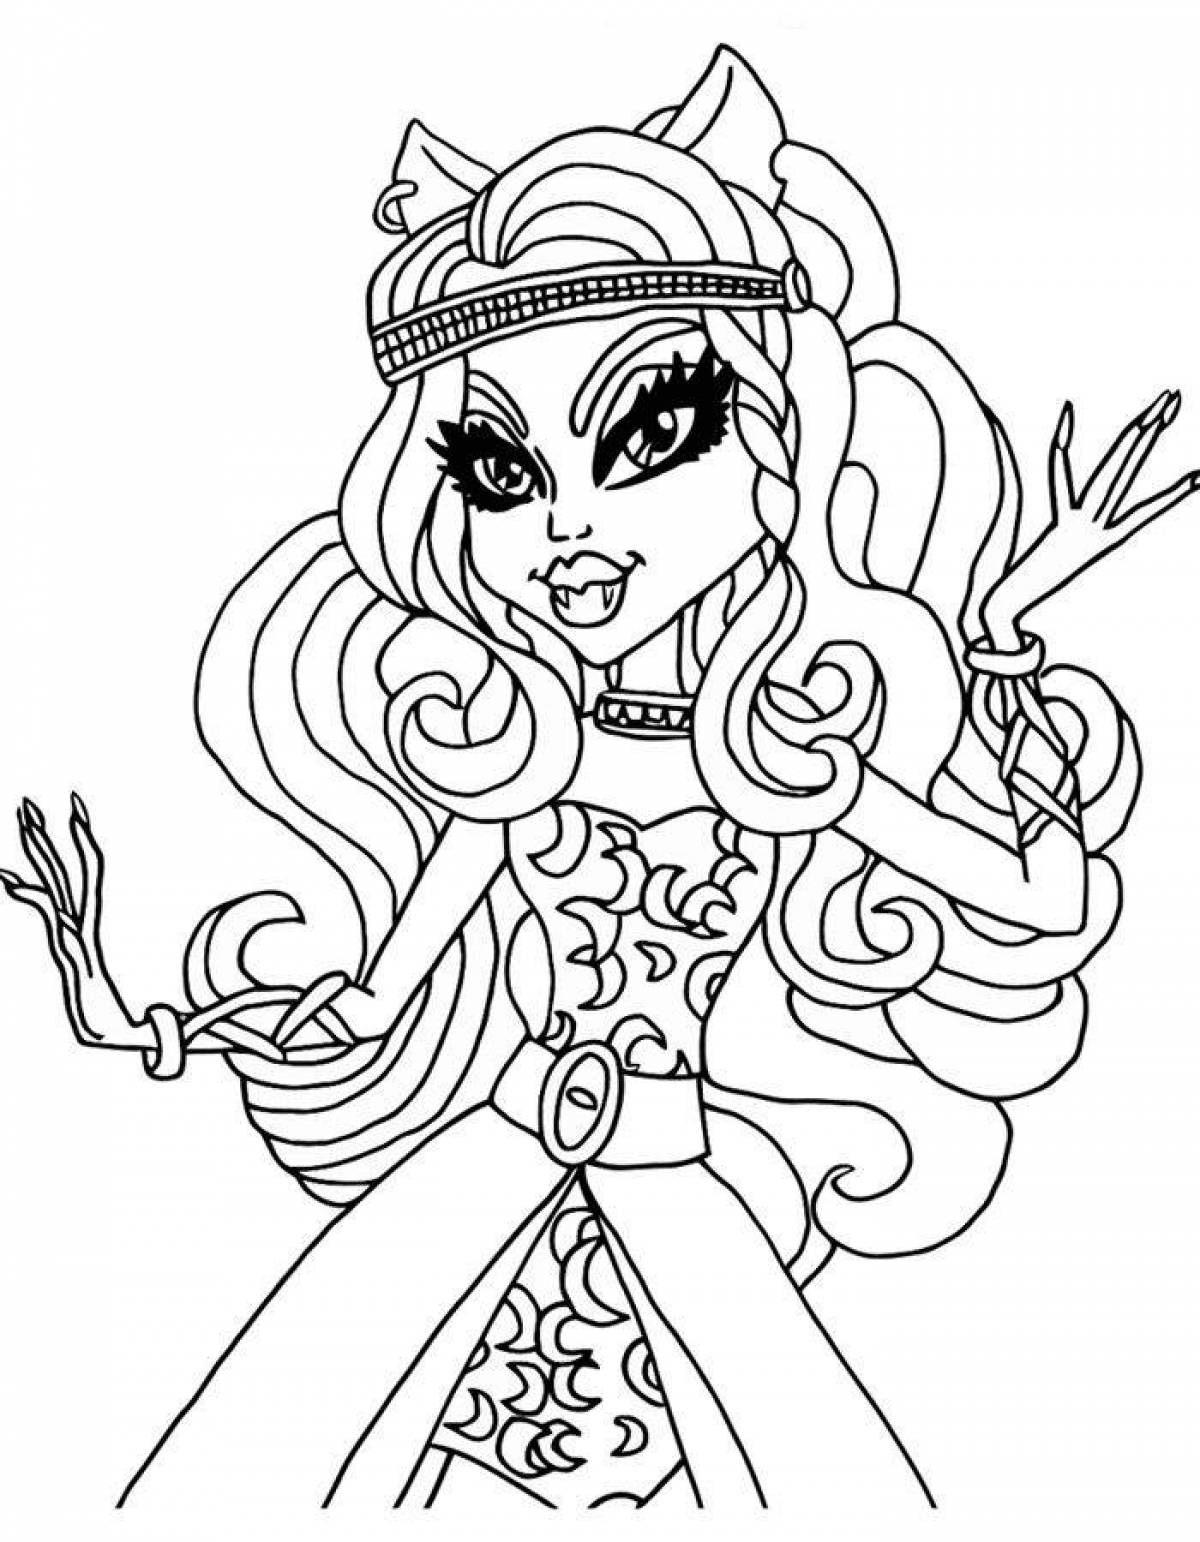 Coloring creepy monster high